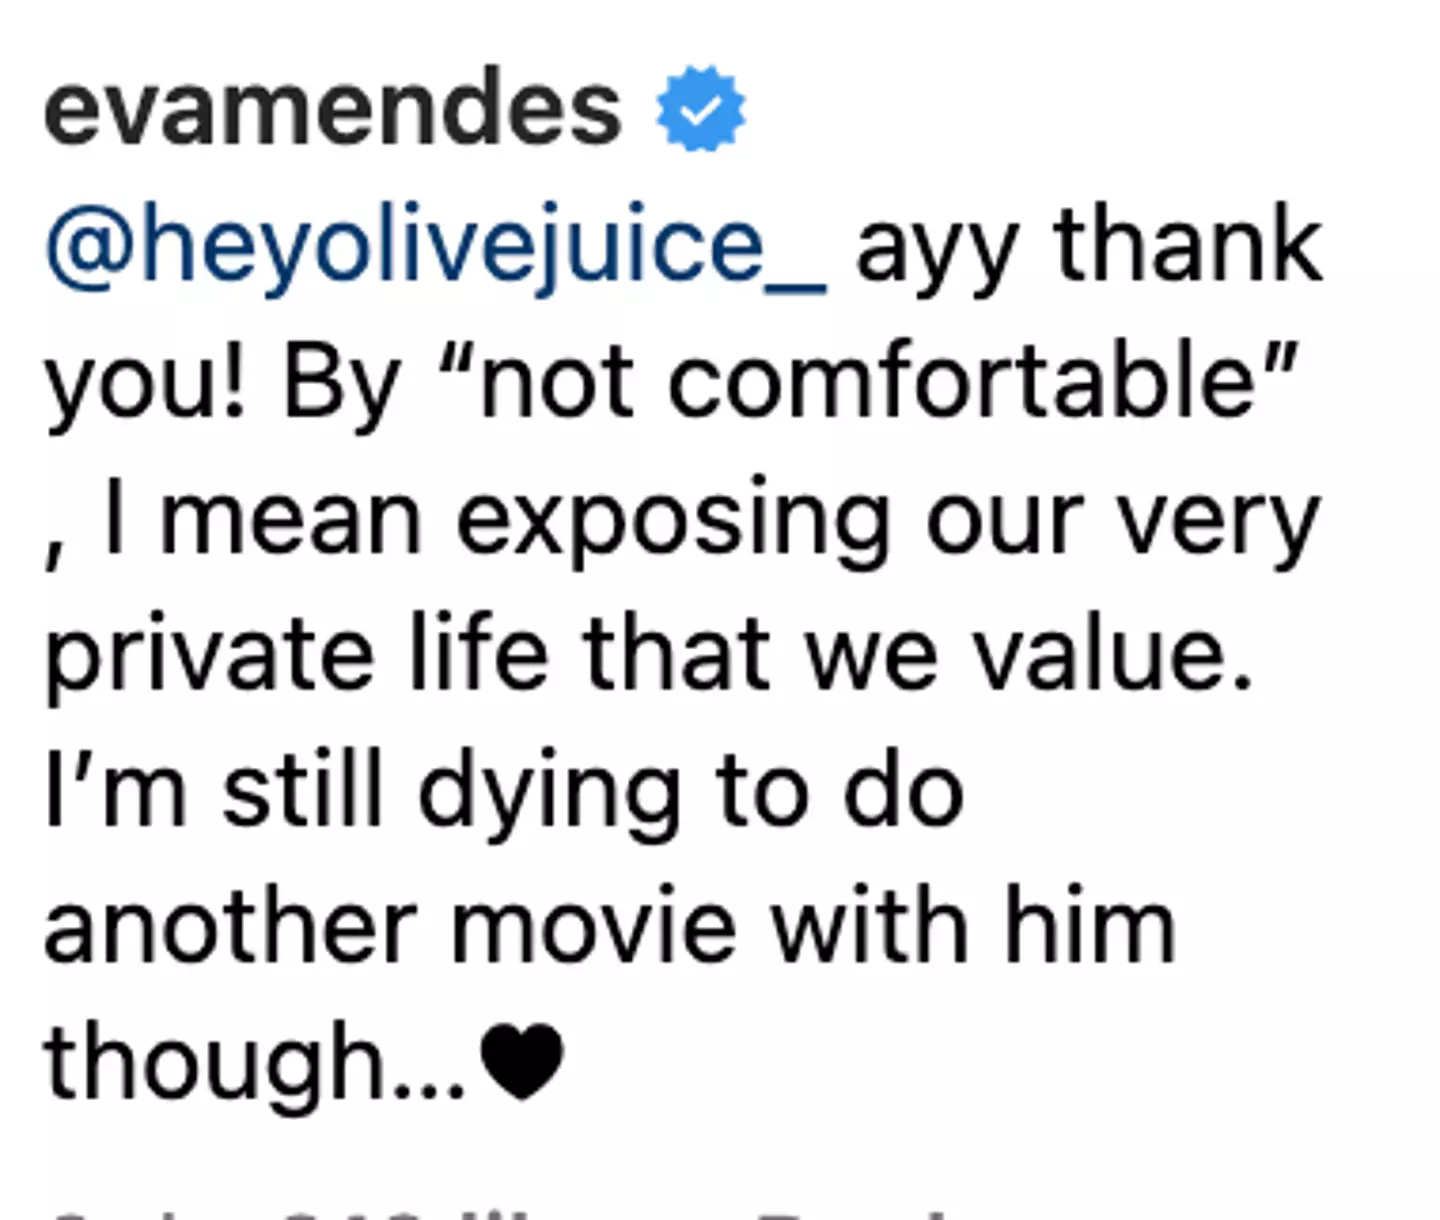 Mendes explained she values her private life.